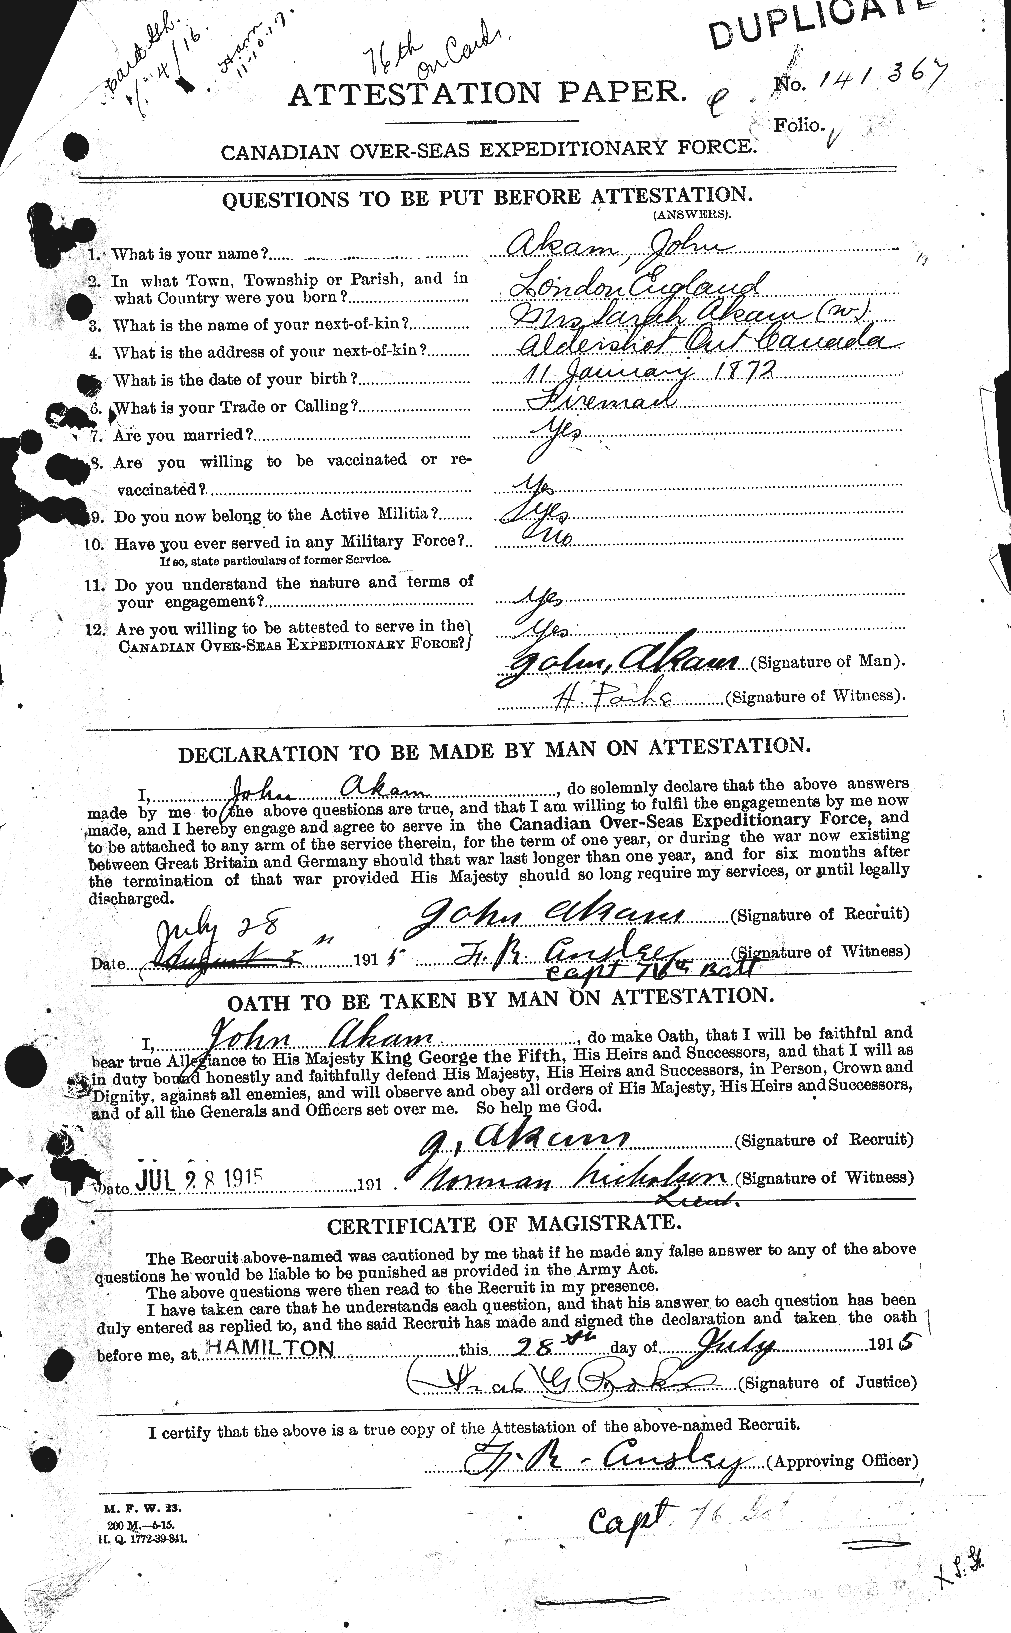 Personnel Records of the First World War - CEF 203500a